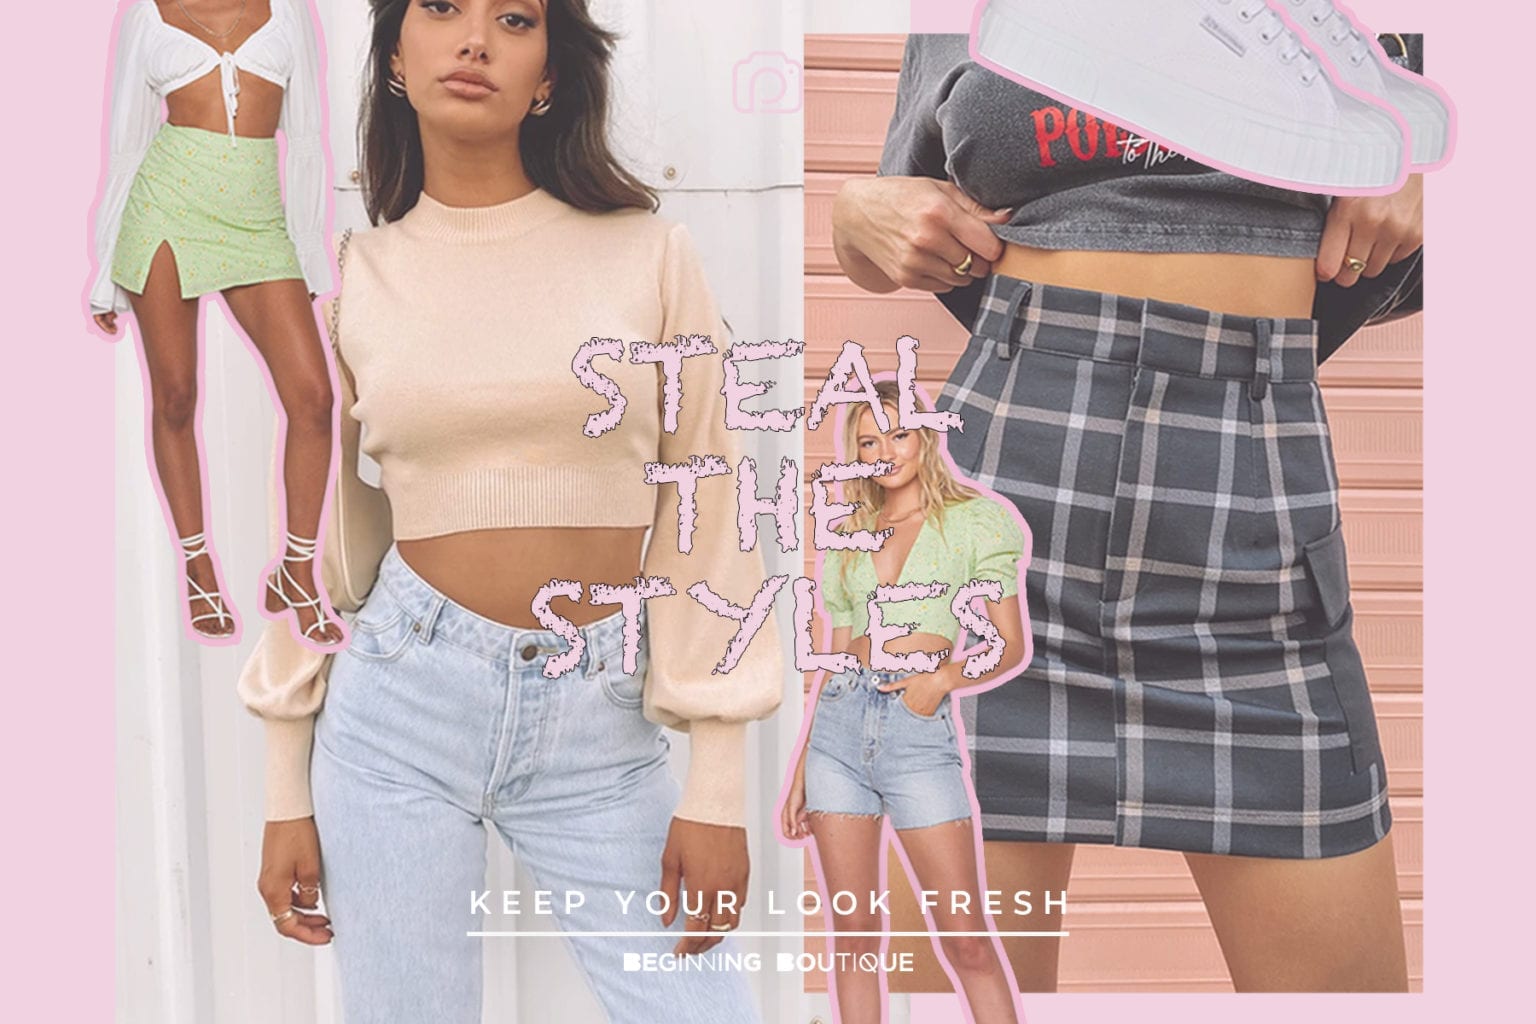 Steal these styles for your OOTD | People's Inc.